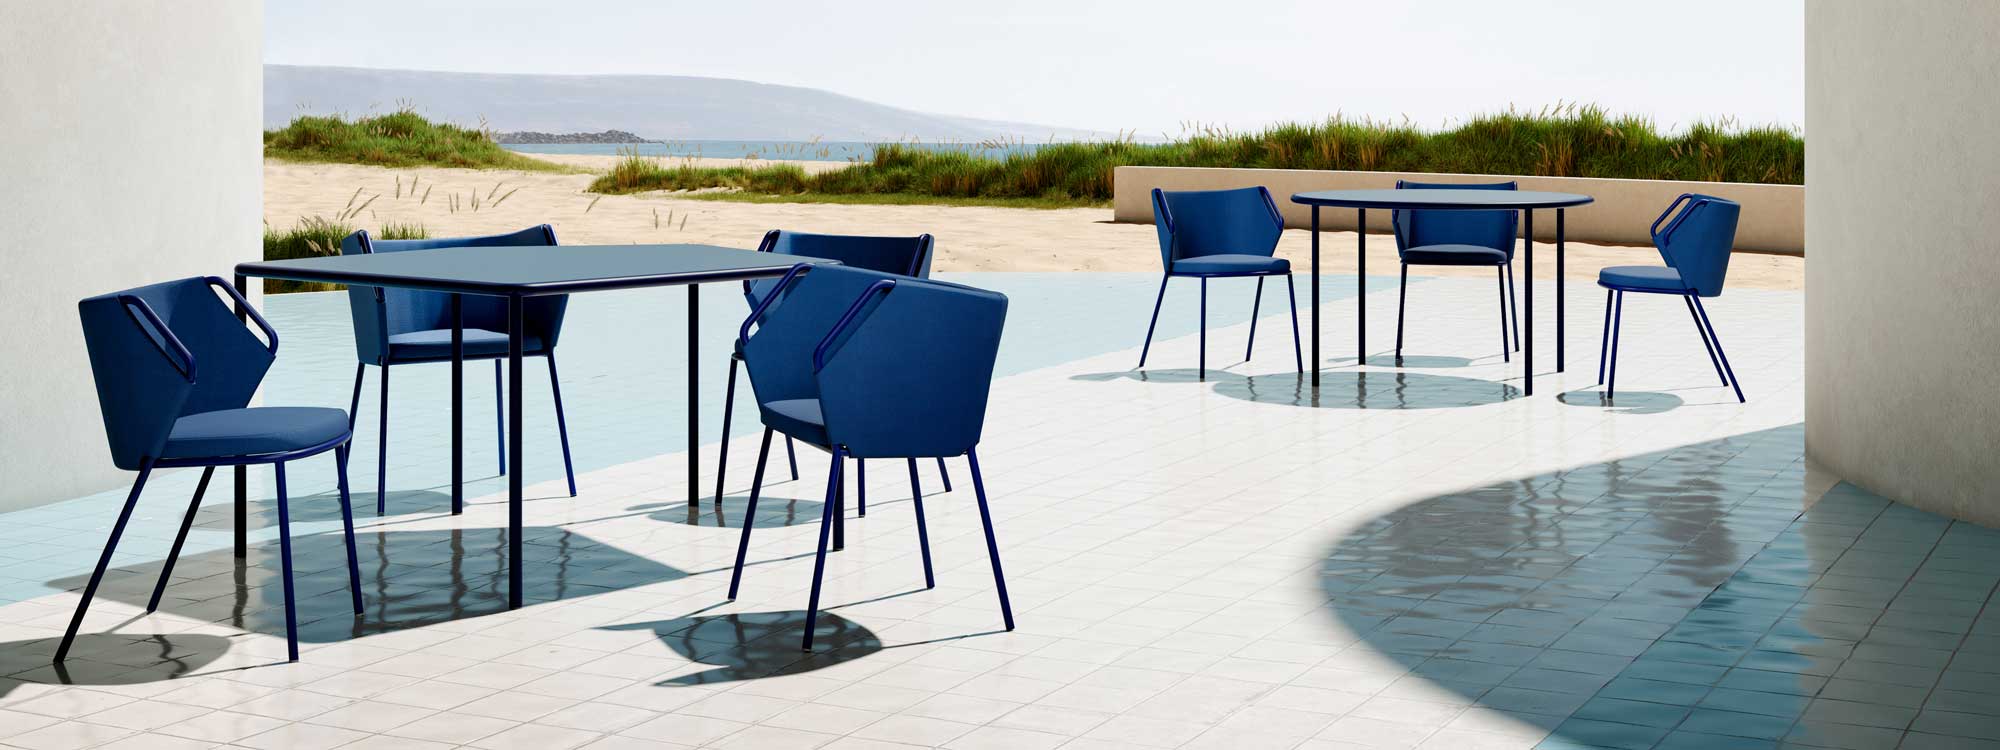 Image of Violet modern outdoor tables and chairs on chiringuito terrace with dunes, beach and sea in the background